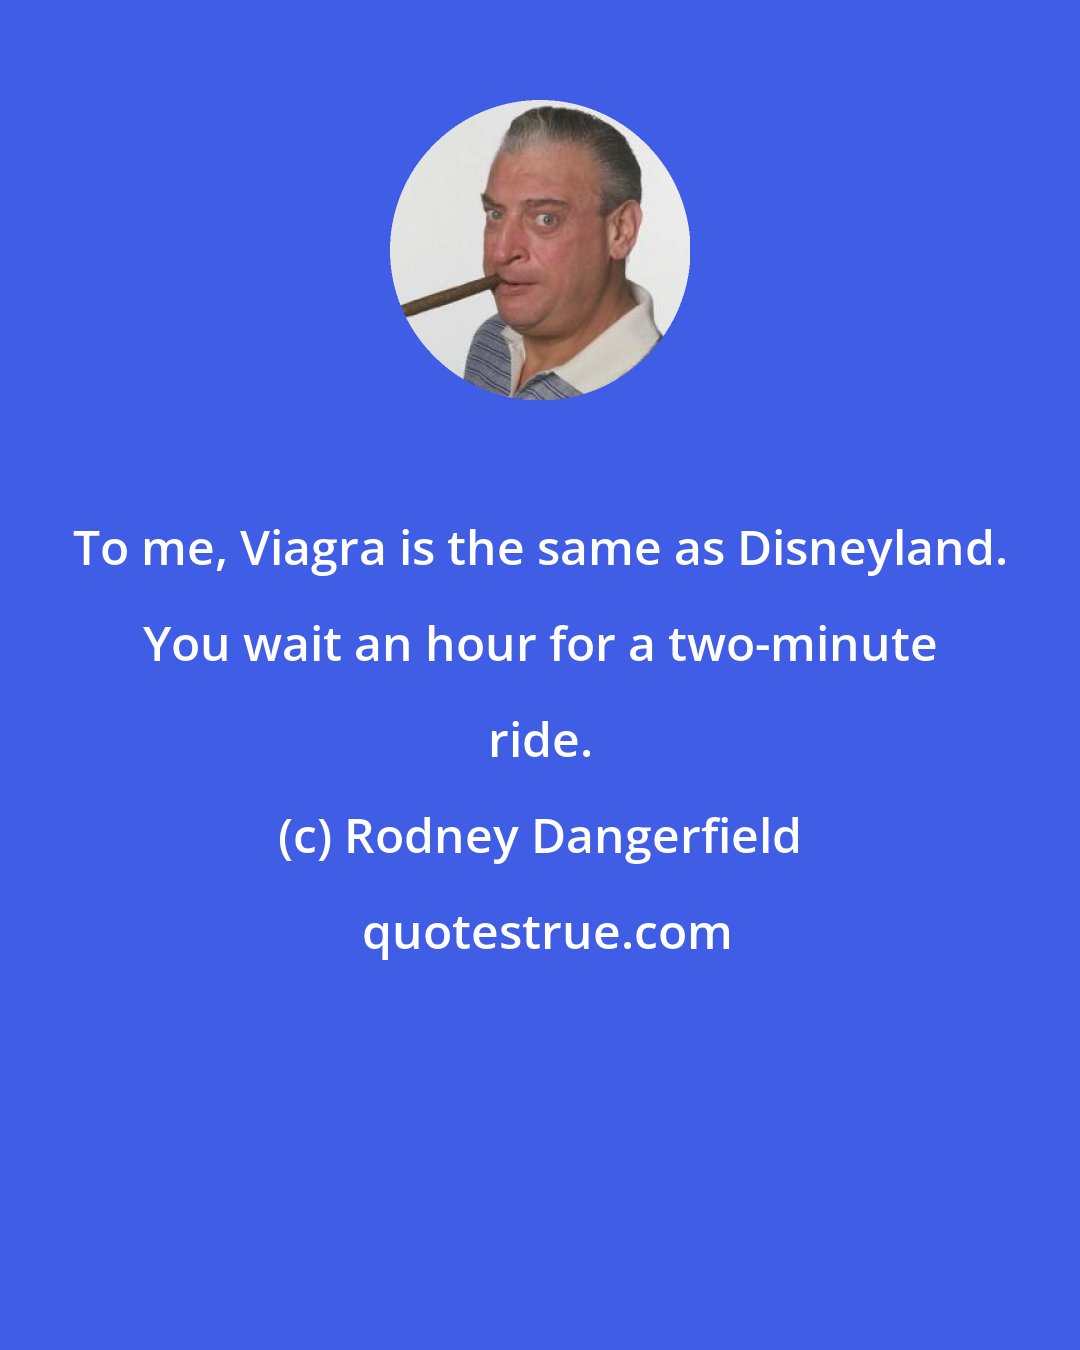 Rodney Dangerfield: To me, Viagra is the same as Disneyland. You wait an hour for a two-minute ride.